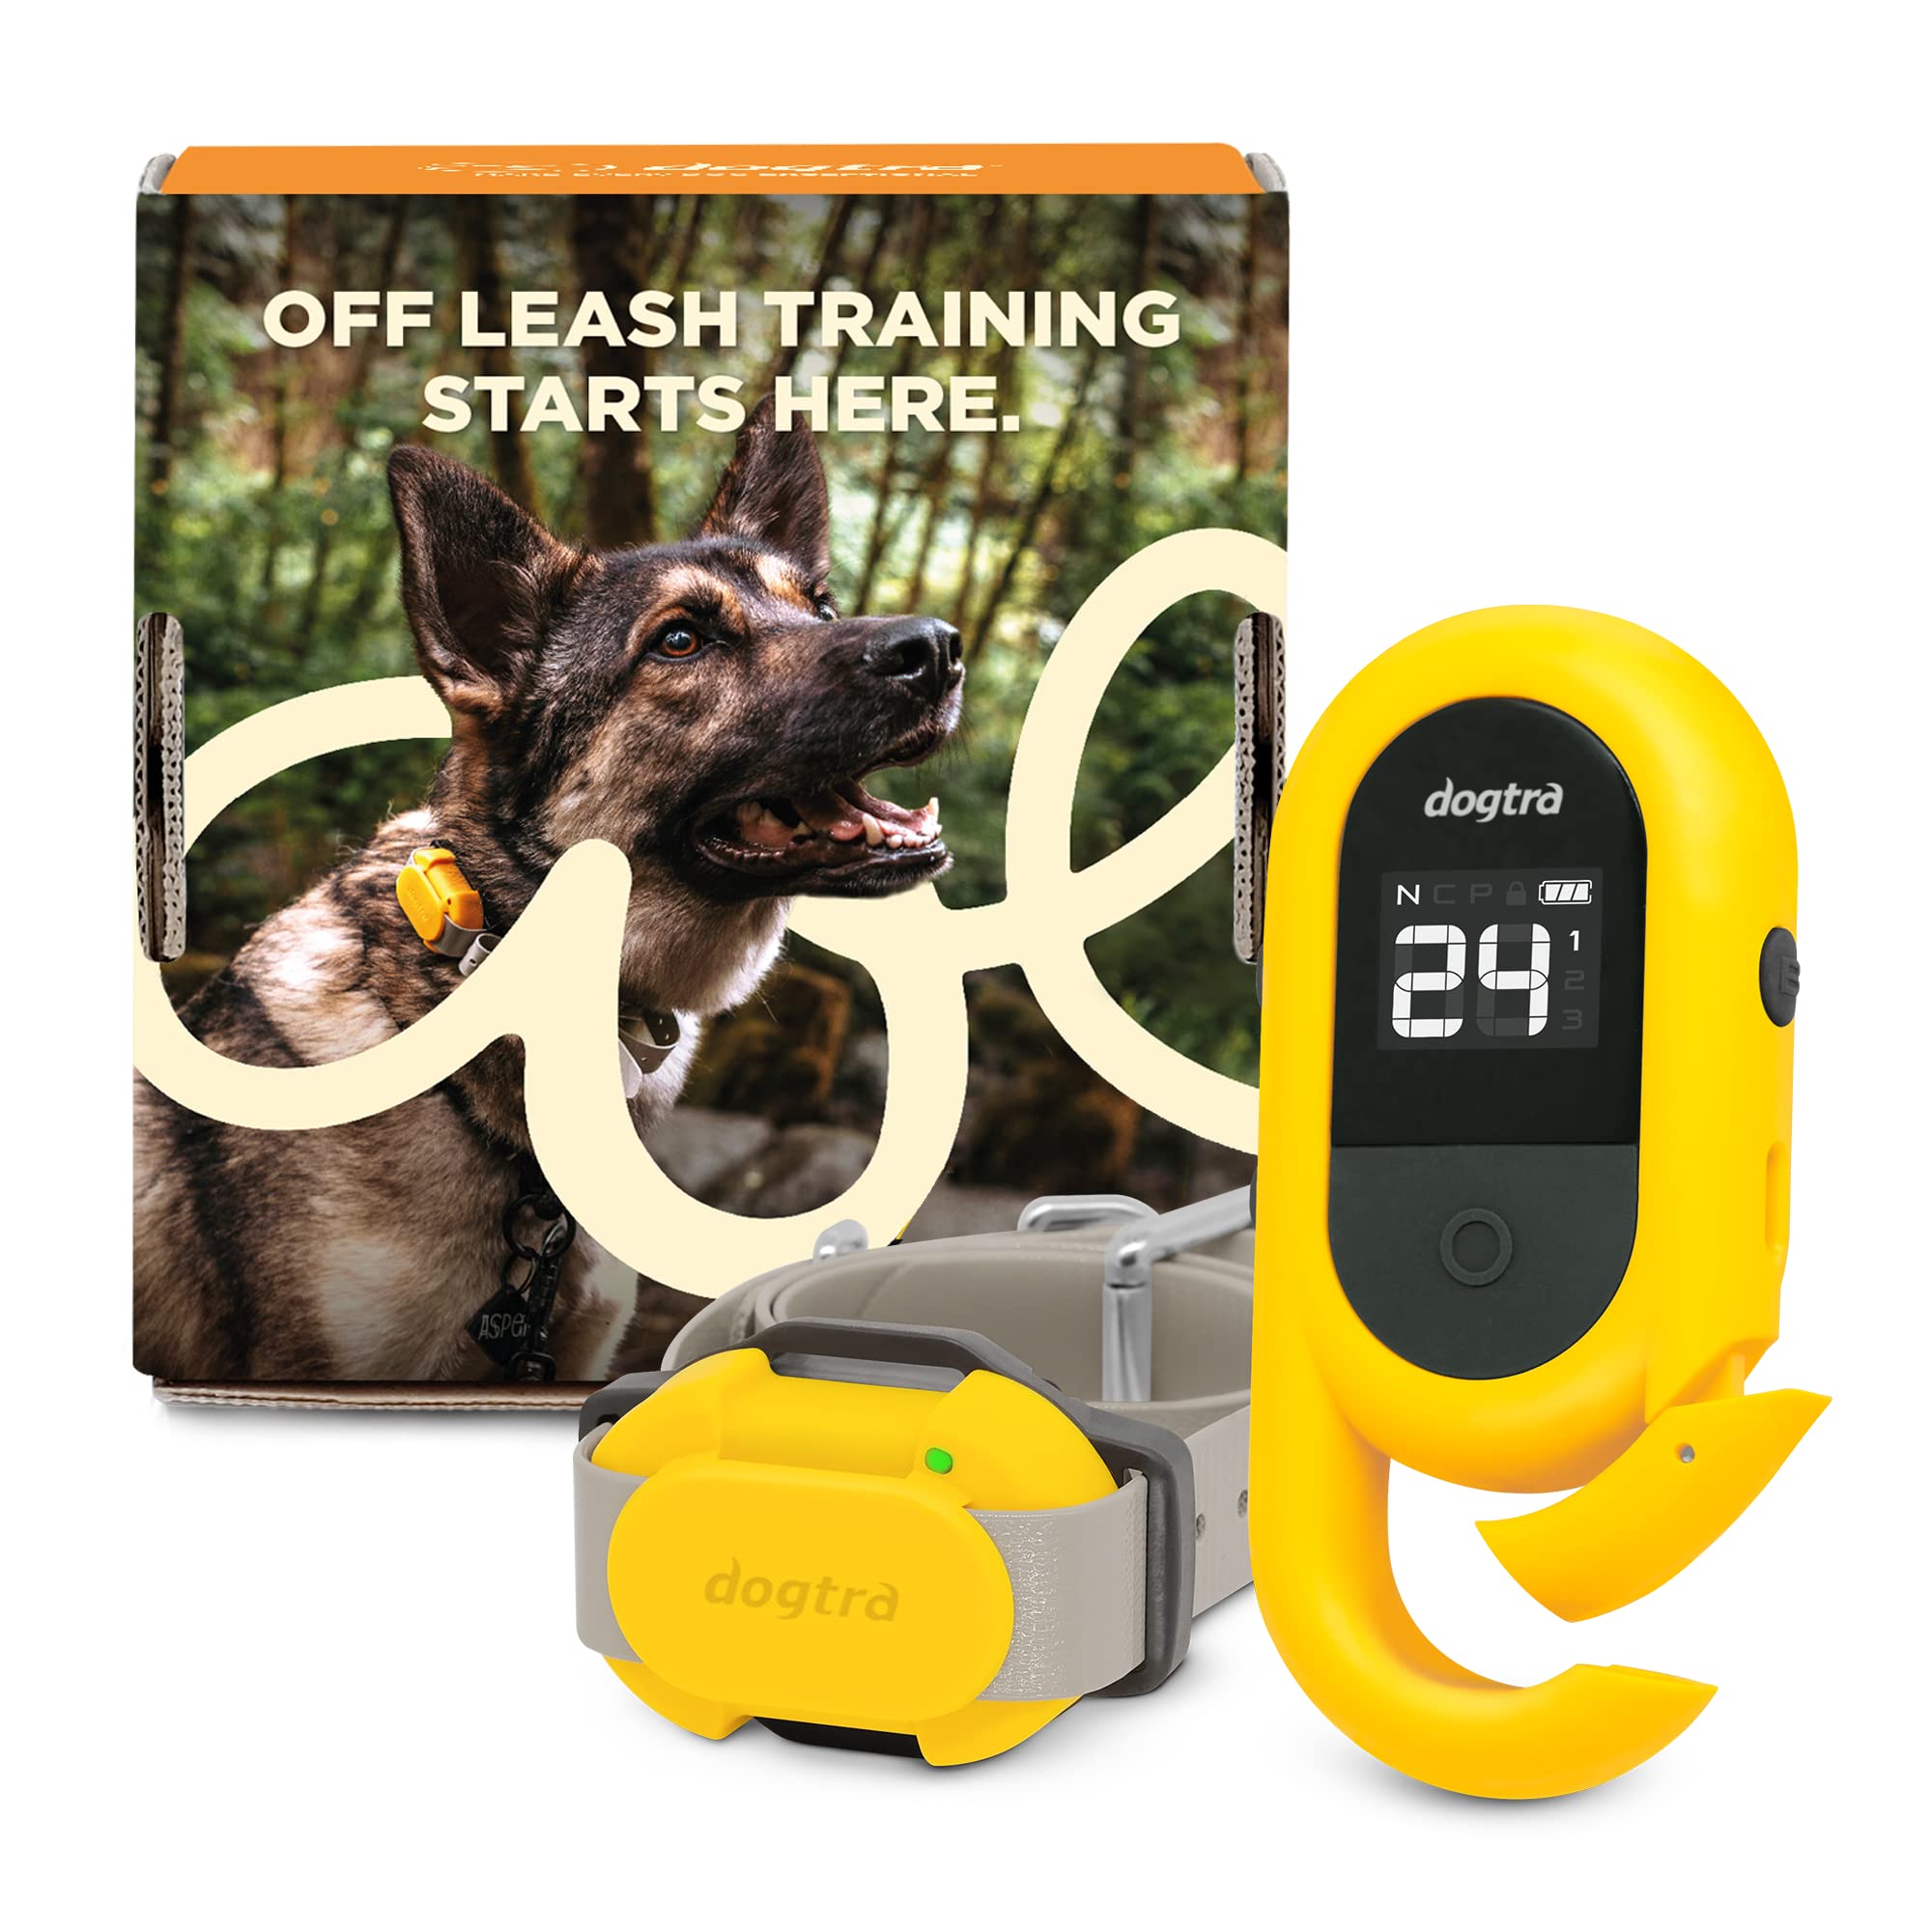 CUE E-Collar with Safety Level Lock Boost Vibration Waterproof Rechargeable for Small Medium Large Dogs Dog Training Collar by Dogtra $179.99